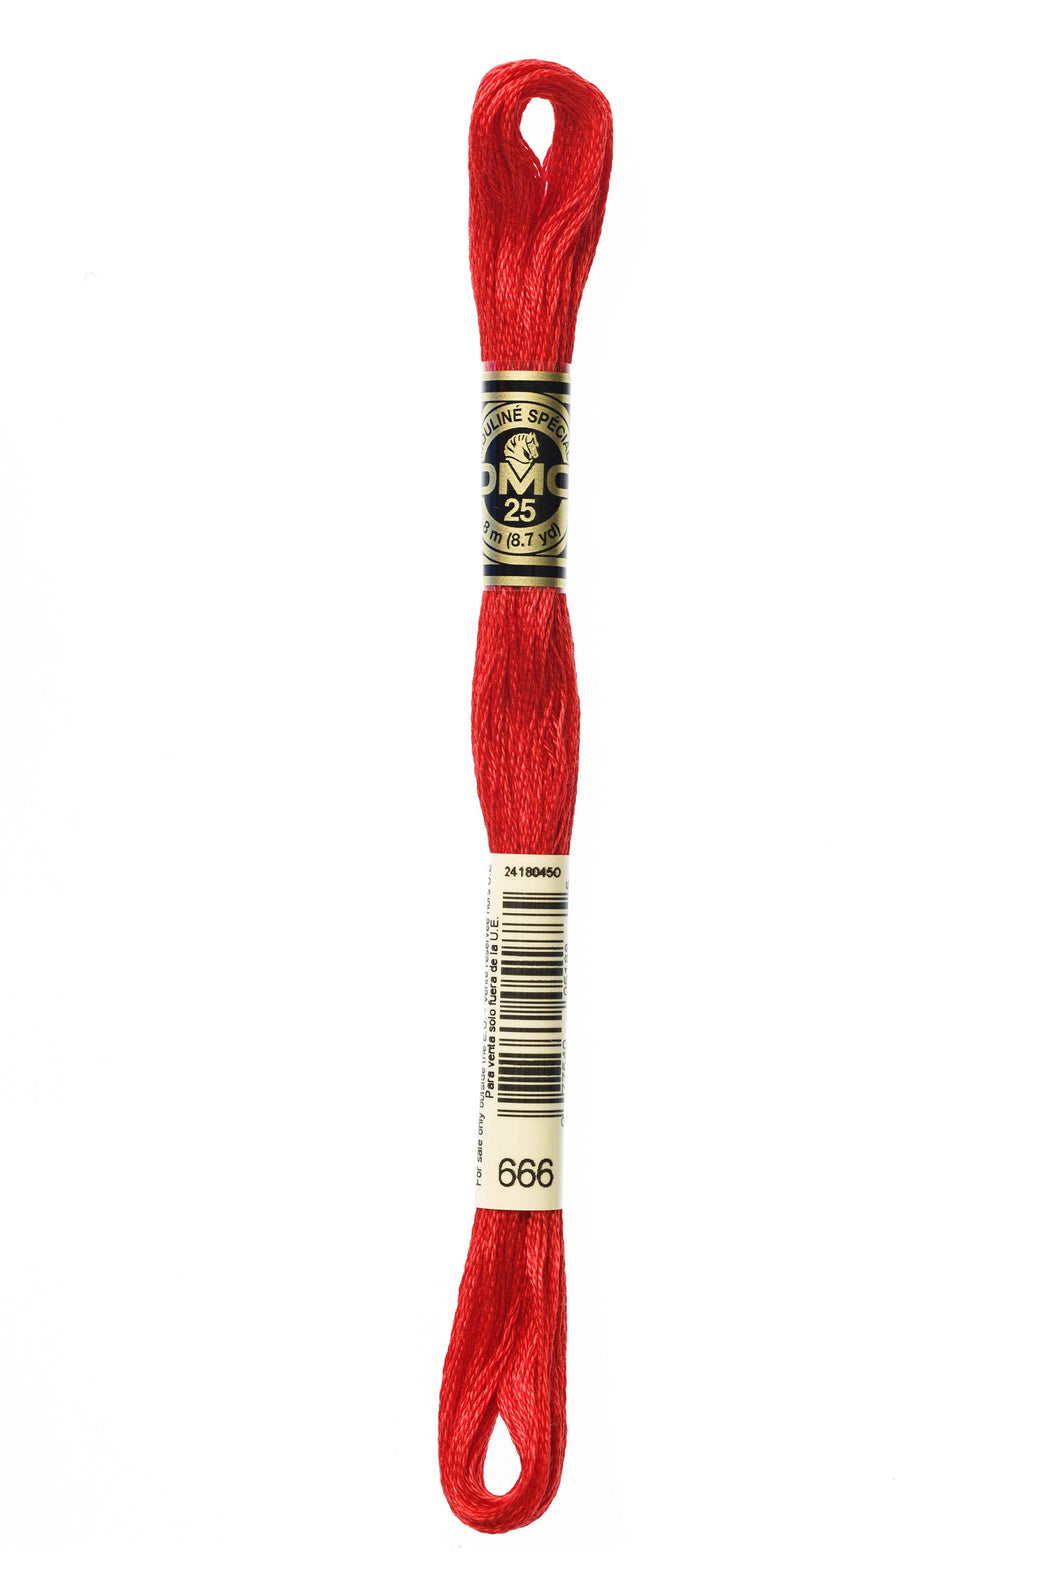 DMC 666 Bright Red 6 Strand Embroidery Floss